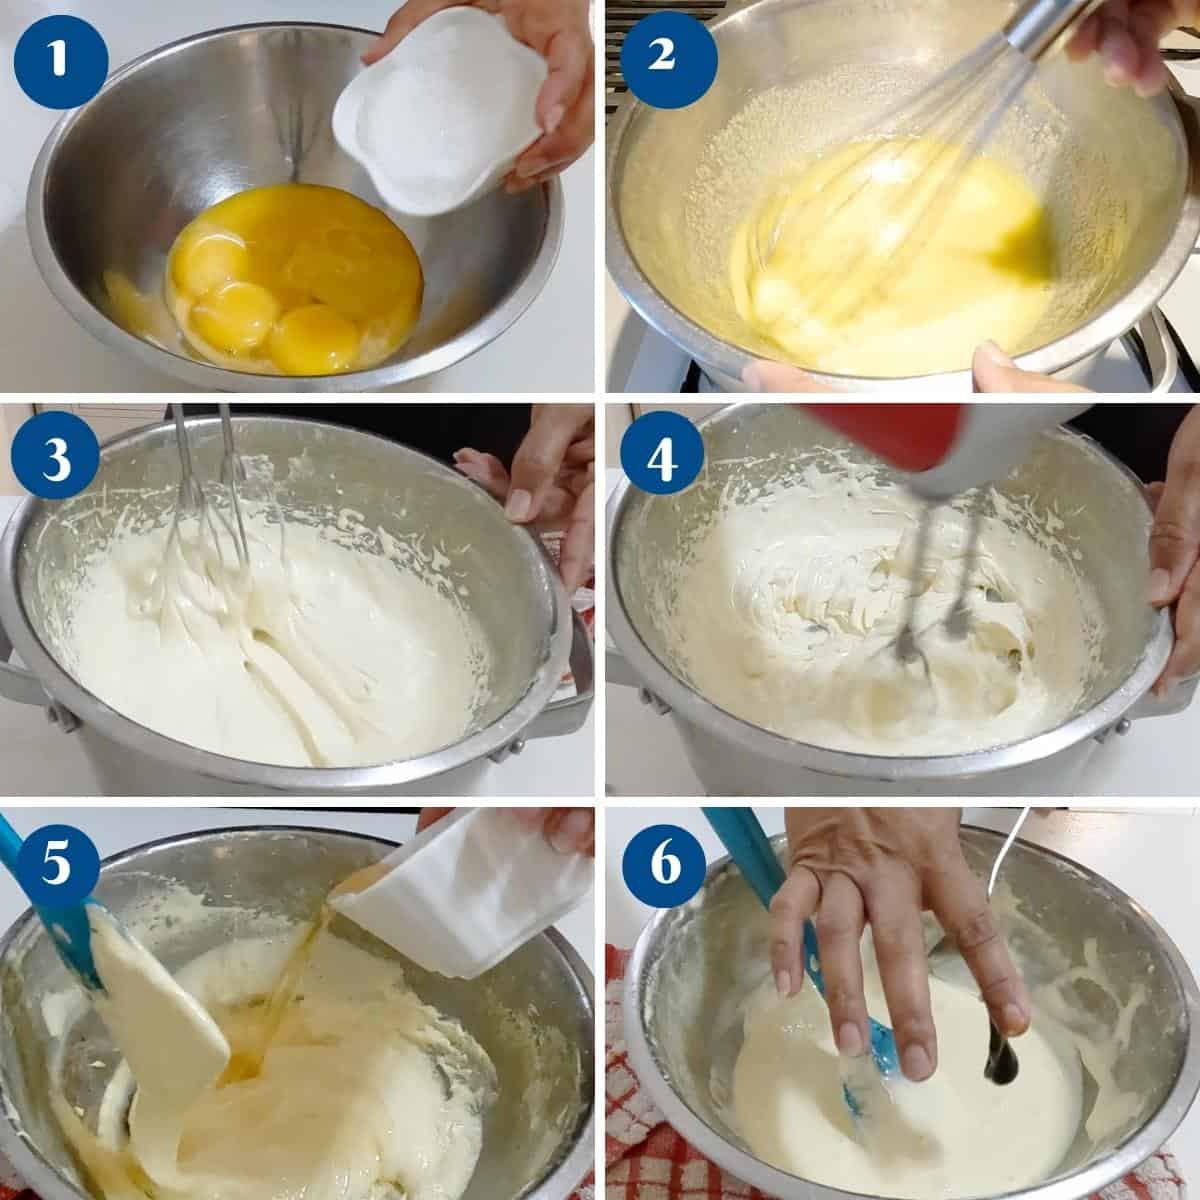 Progress pictures making the egg yolk mixture.